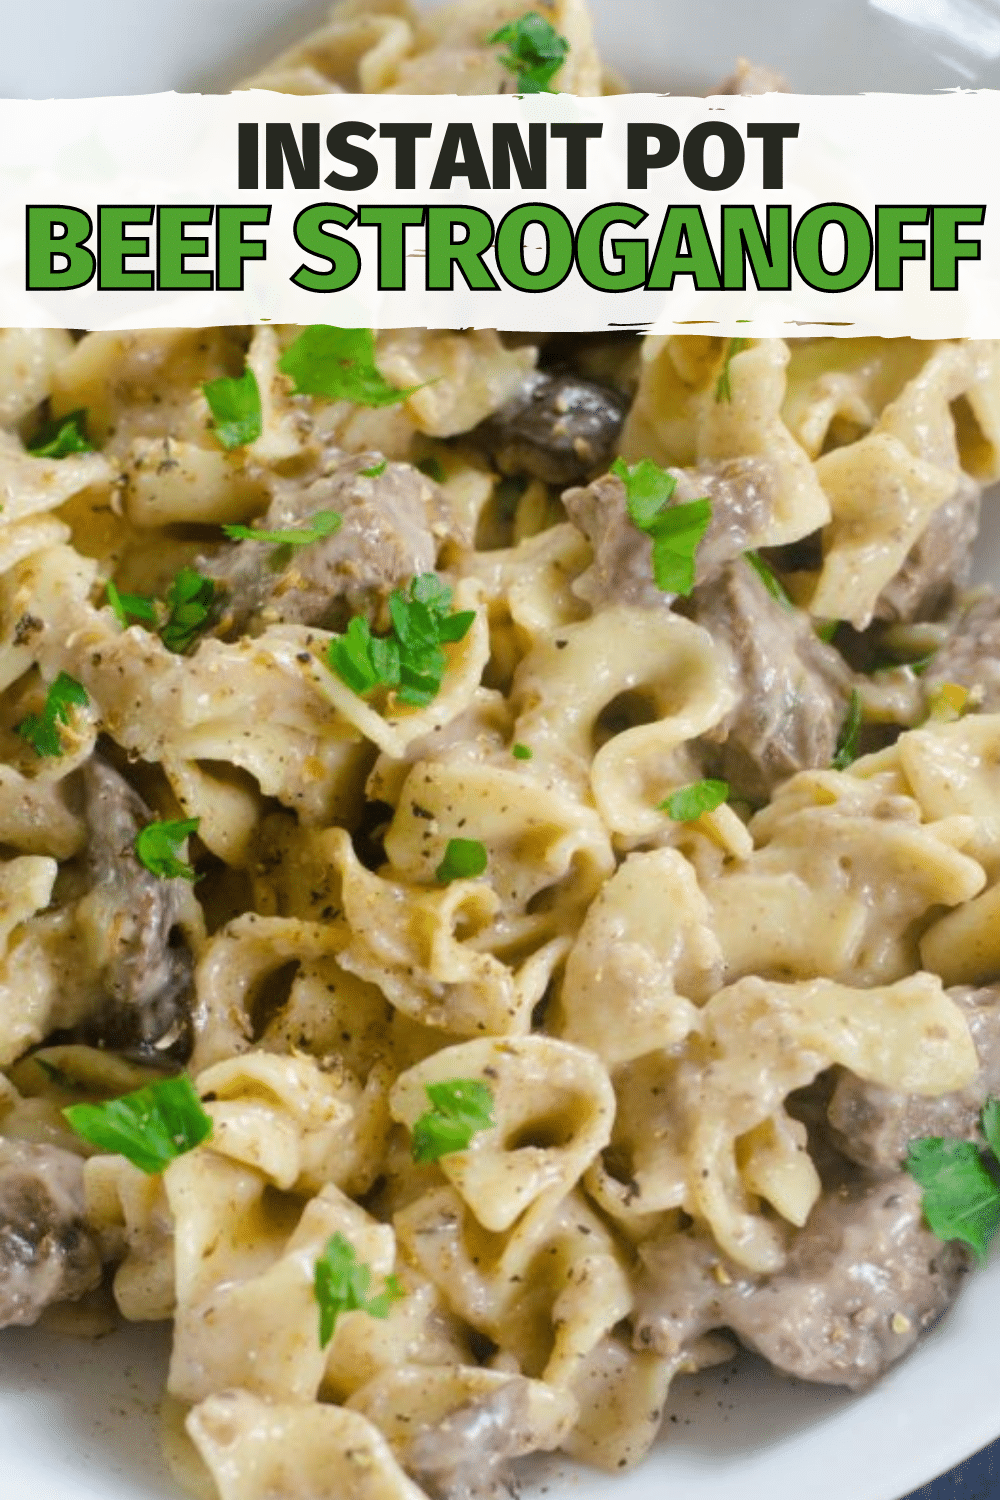 There are many recipes that bring comfort and feel like classic family favorites. This Instant Pot Beef Stroganoff is one of them. #instantpot #pressurecooker #beefstroganoff #beefrecipe via @wondermomwannab